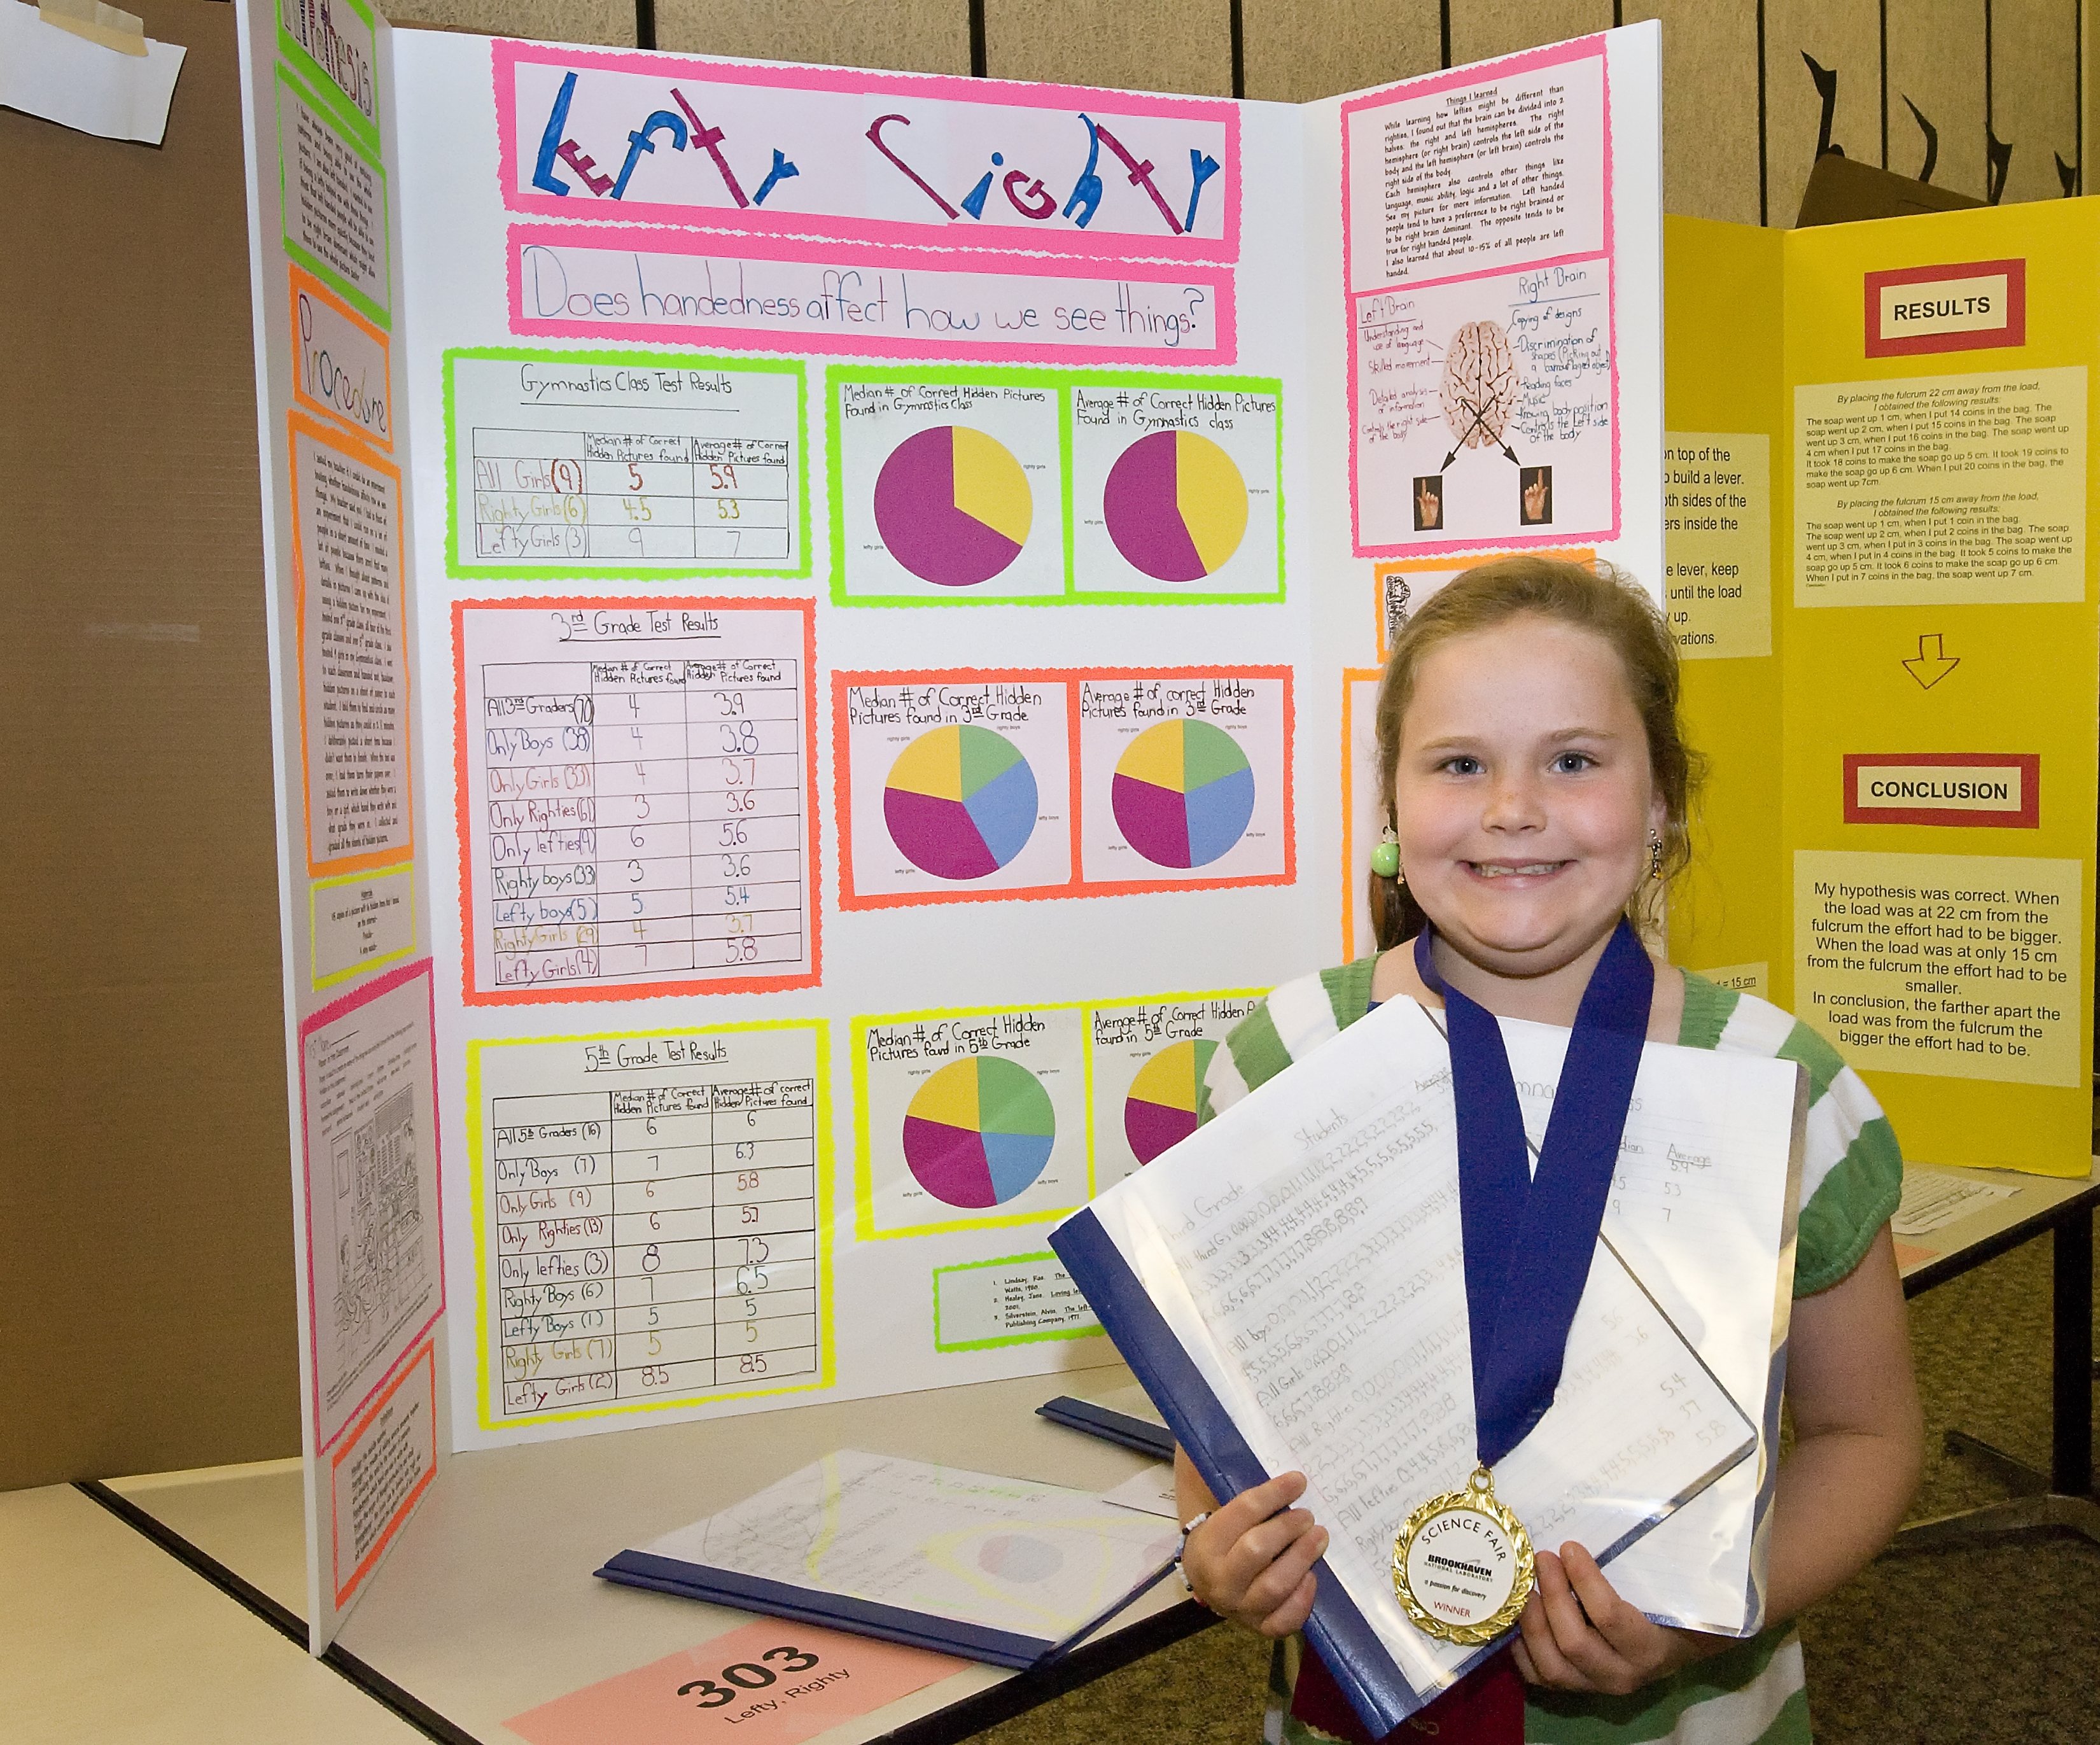 10 Trendy 3Rd Grade Science Projects Ideas second grade science fair project ideas homeshealth 56 2022